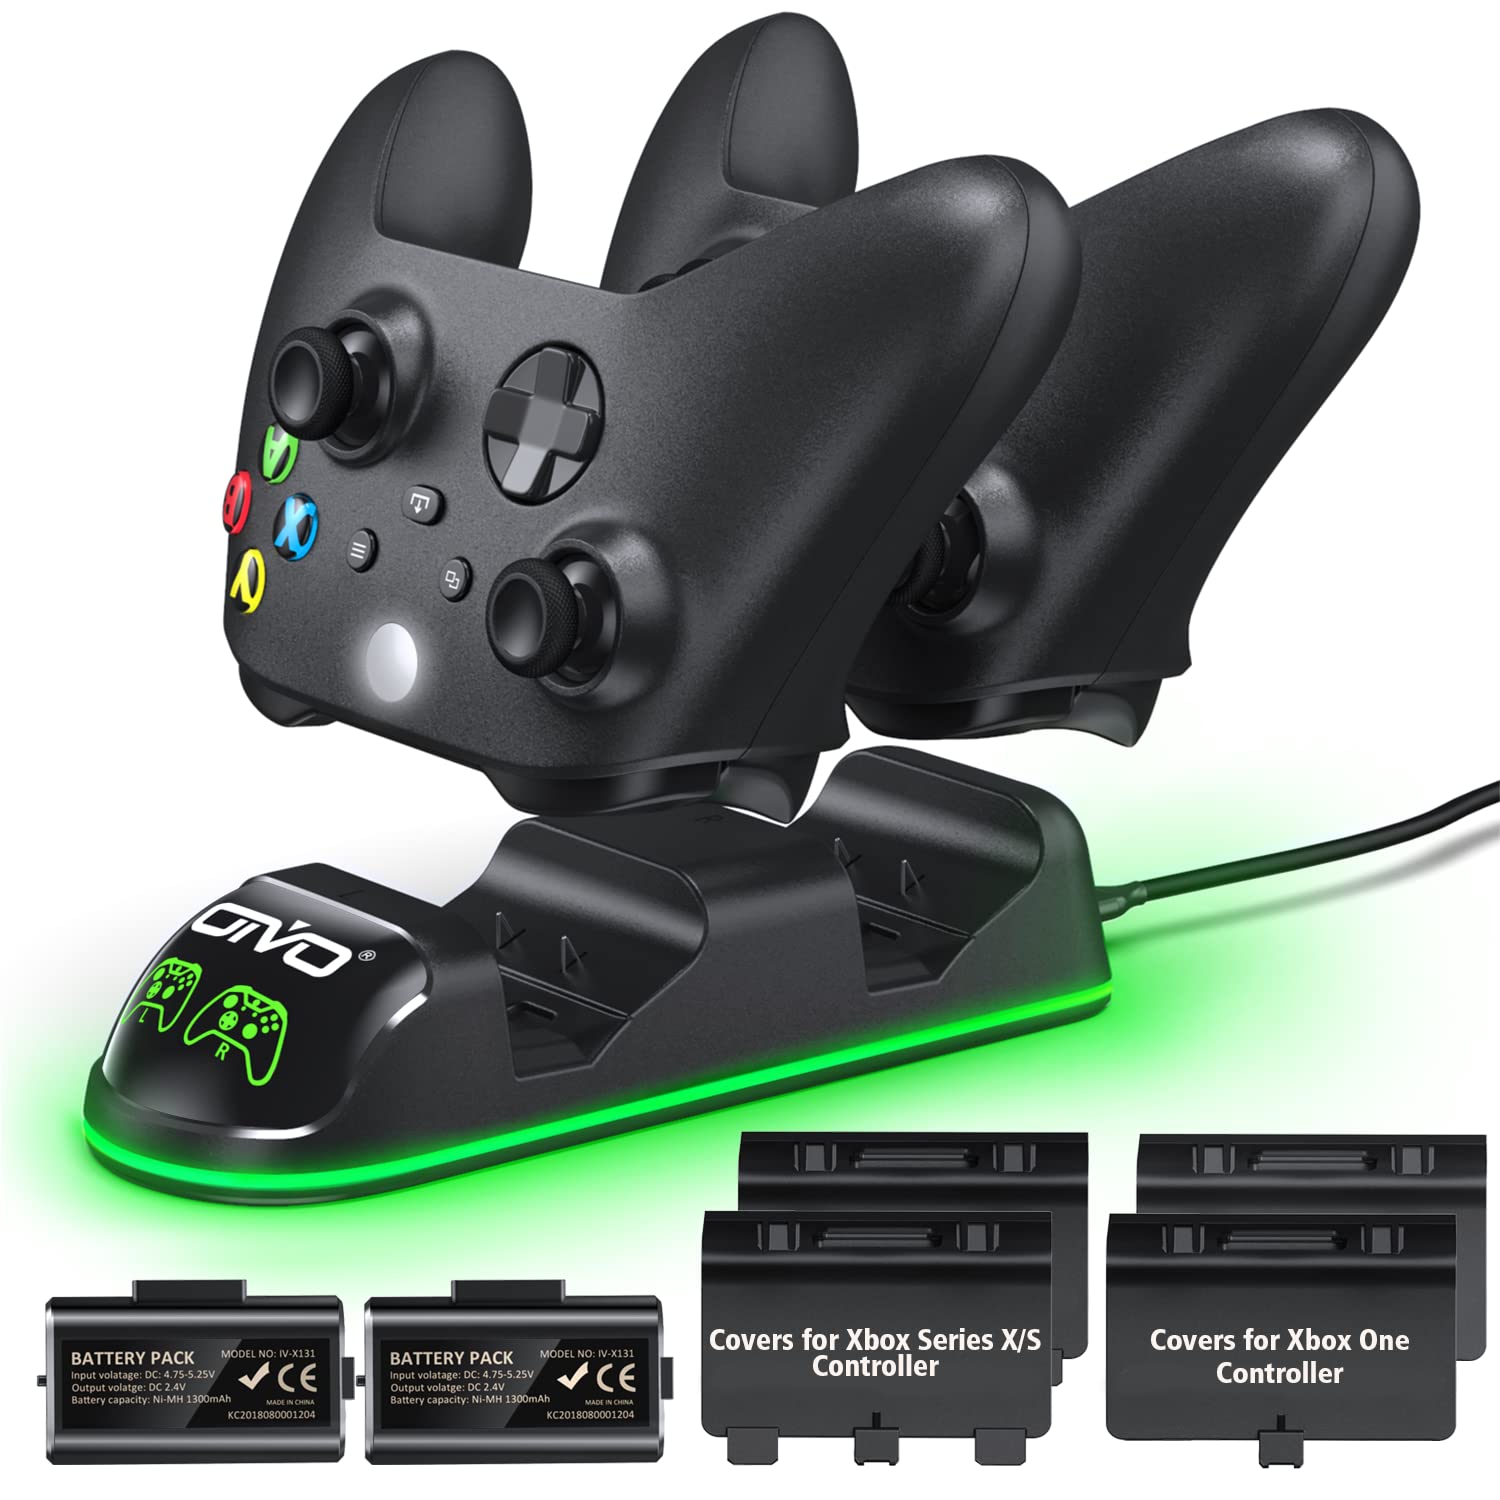 OIVO xbox Controller Charger Station with 2 1300mAh  Batteries for Xbox Series X/S/One/Elite/Core Controllers $9.99